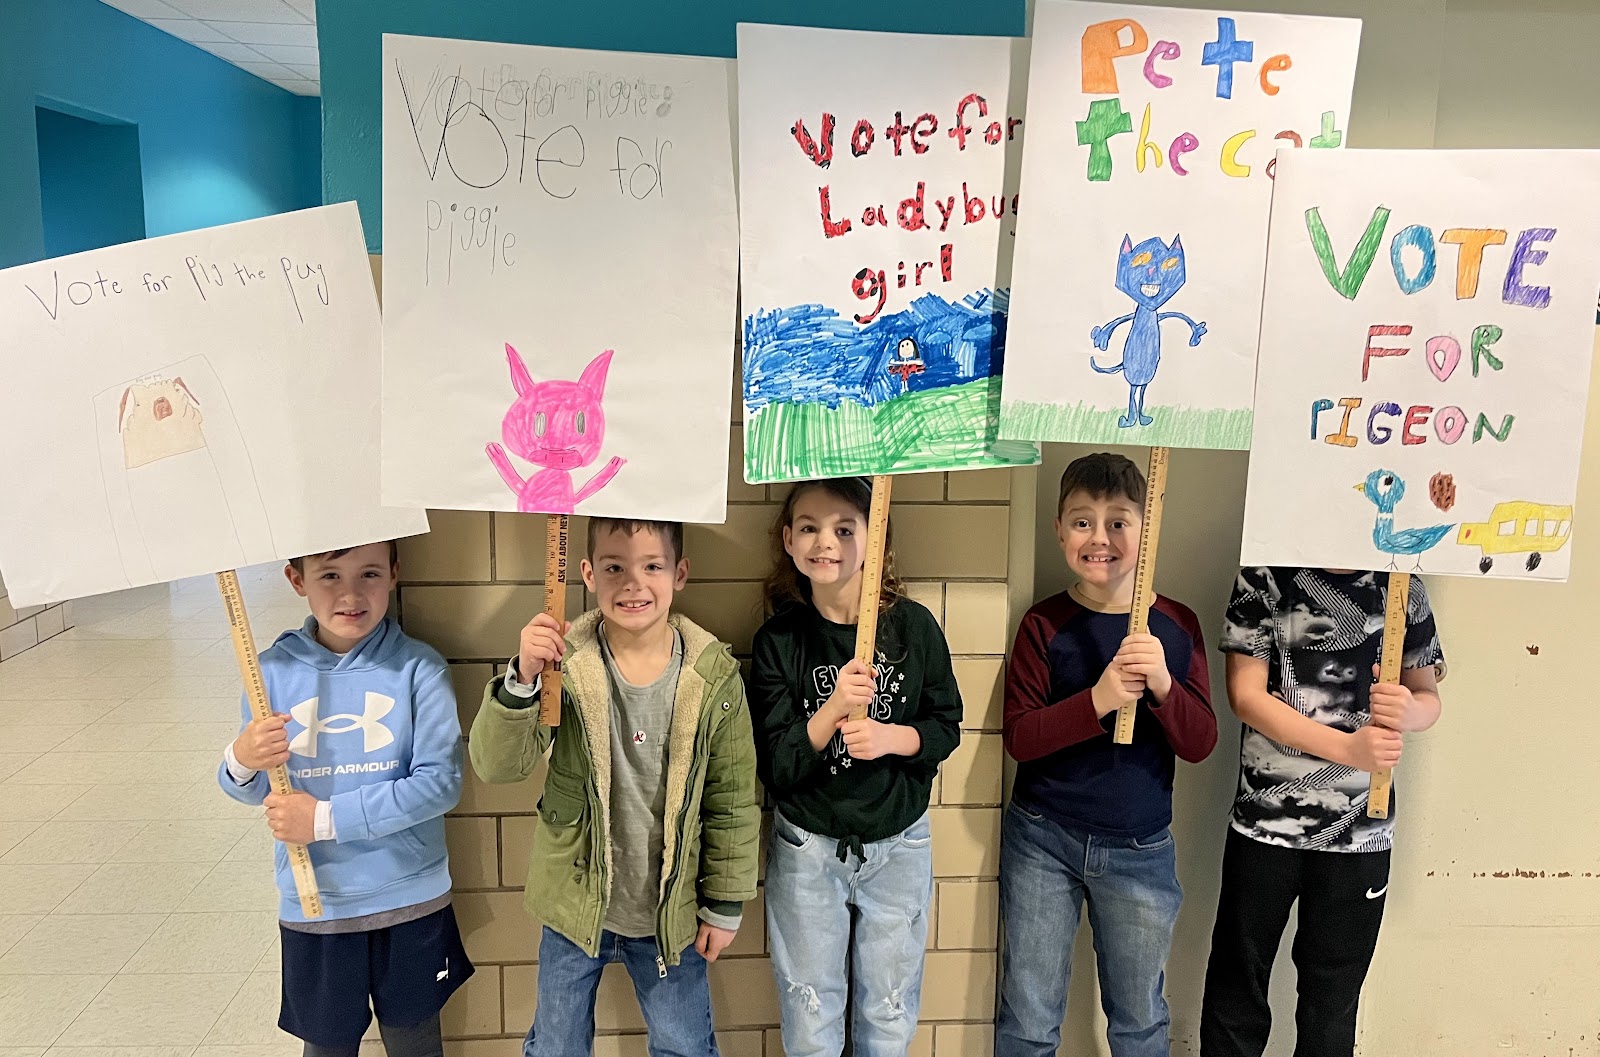 image of students holding voting signs